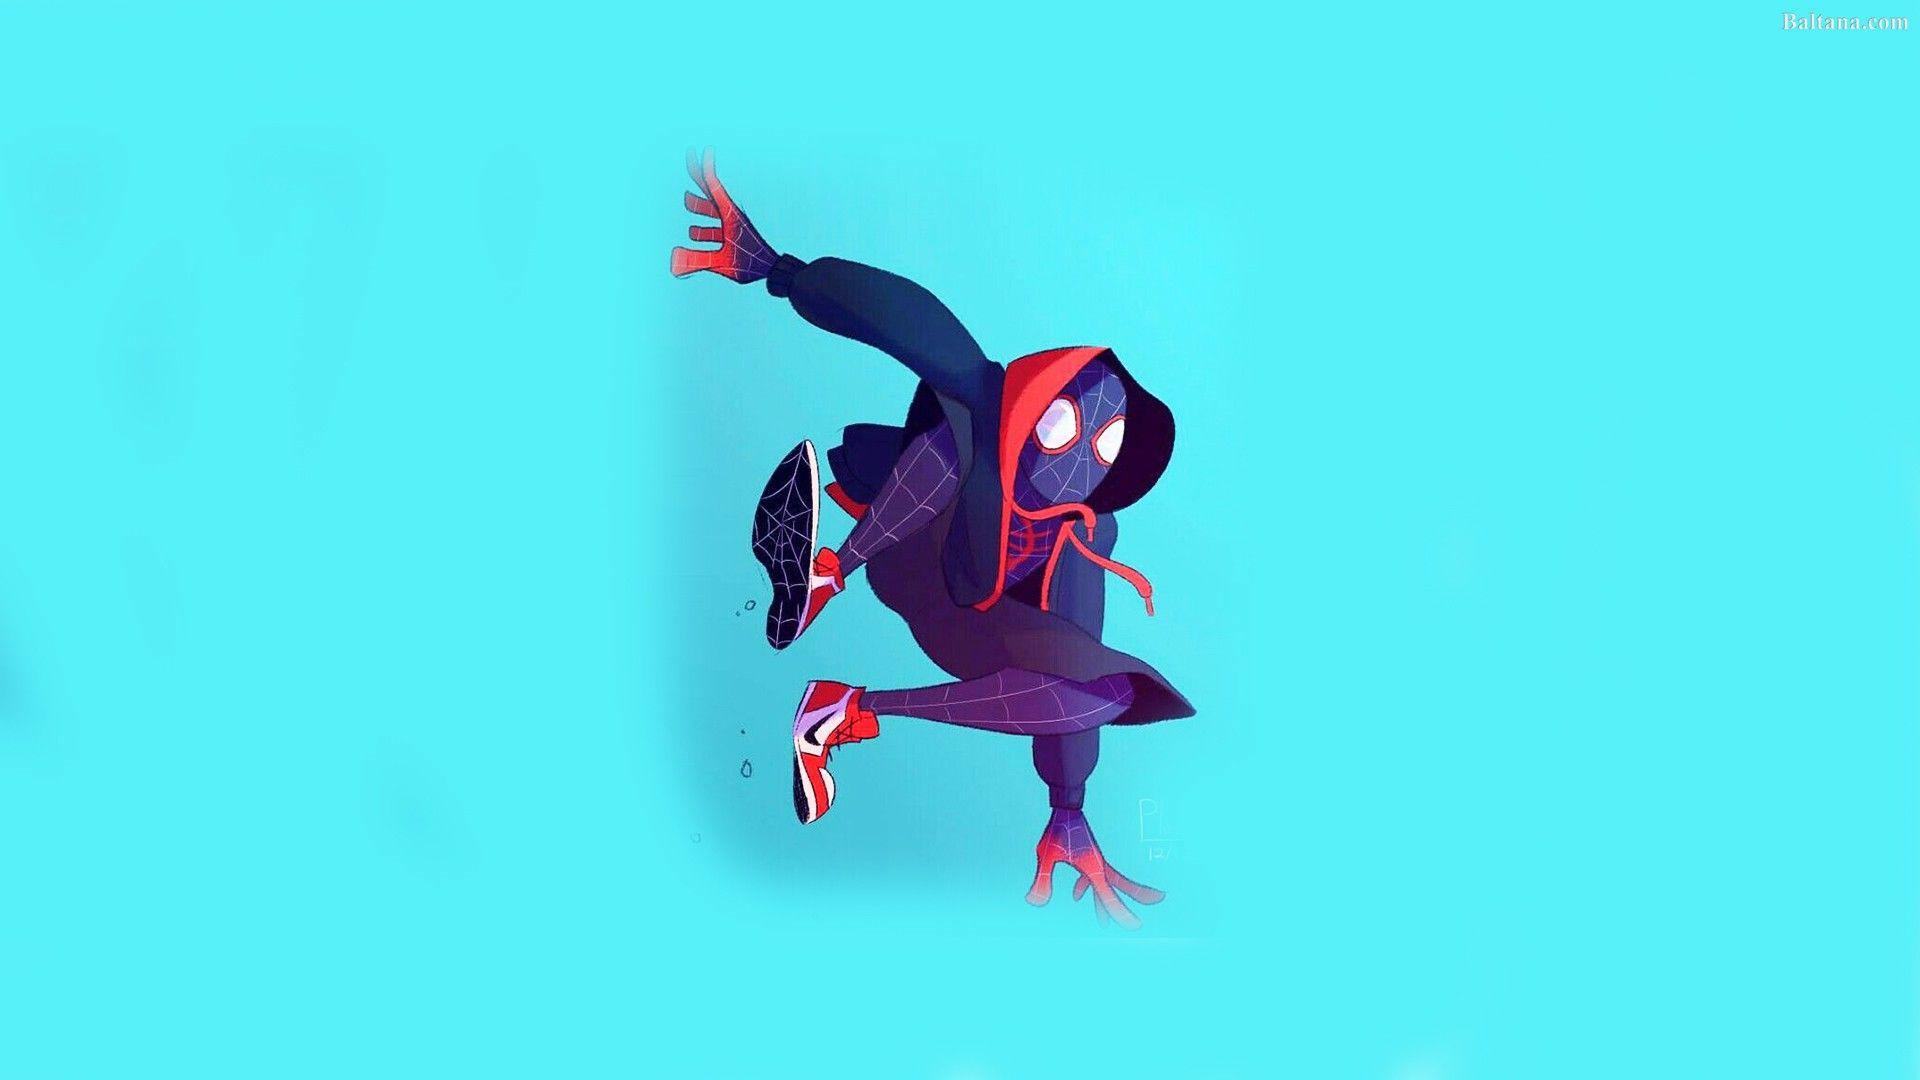 spider man into the spider verse iPhone Wallpapers Free Download